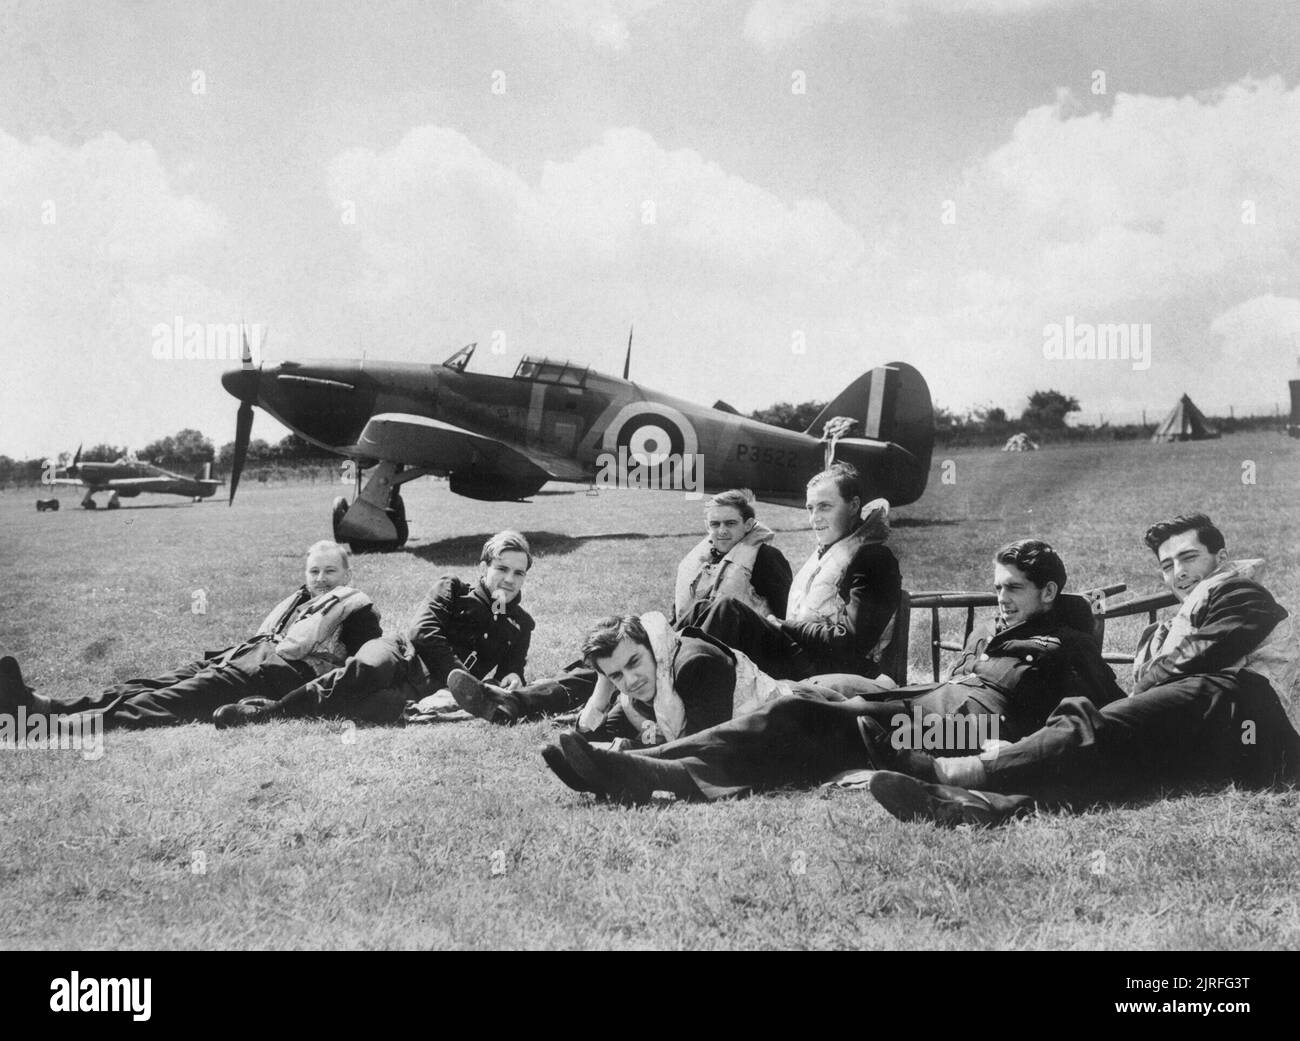 The Battle of Britain Pilots of 'B' Flight, No. 32 Squadron relax on the grass at Hawkinge in front of Hurricane Mk I P3522, GZ-V. From left to right: Pilot Officer R F Smythe; Pilot Officer K R Gillman; Pilot Officer J E Procter; Flight Lieutenant P M Brothers; Pilot Officer D H Grice; Pilot Officer P M Gardner and Pilot Officer A F Eckford. All survived the war except Keith Gillman who was posted missing 25 August 1940. Stock Photo